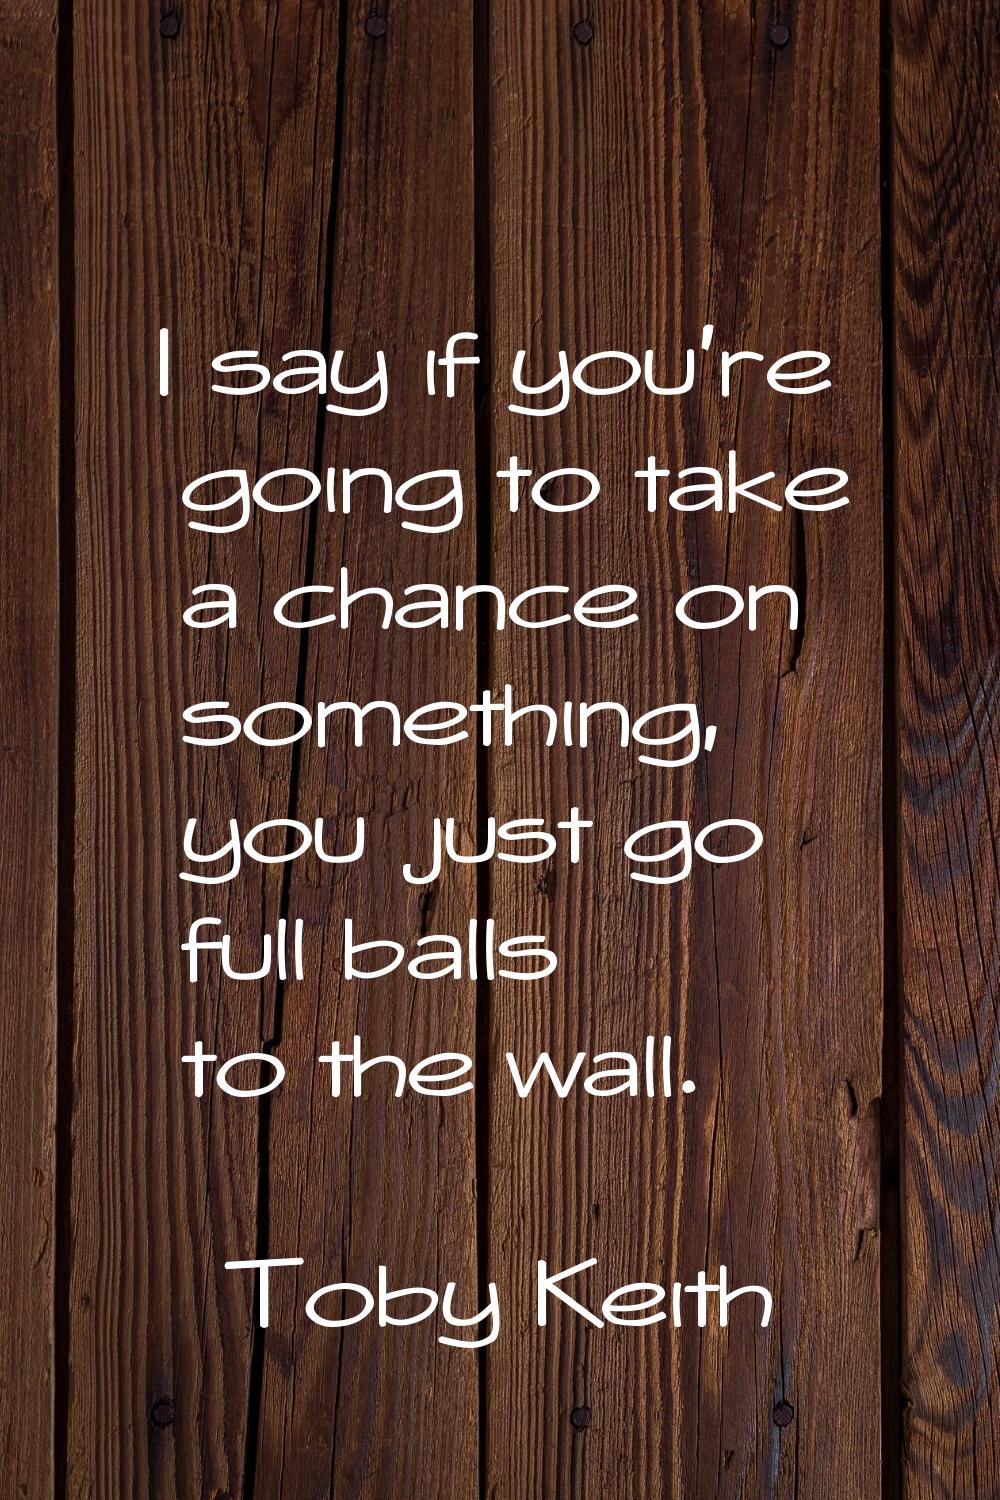 I say if you're going to take a chance on something, you just go full balls to the wall.